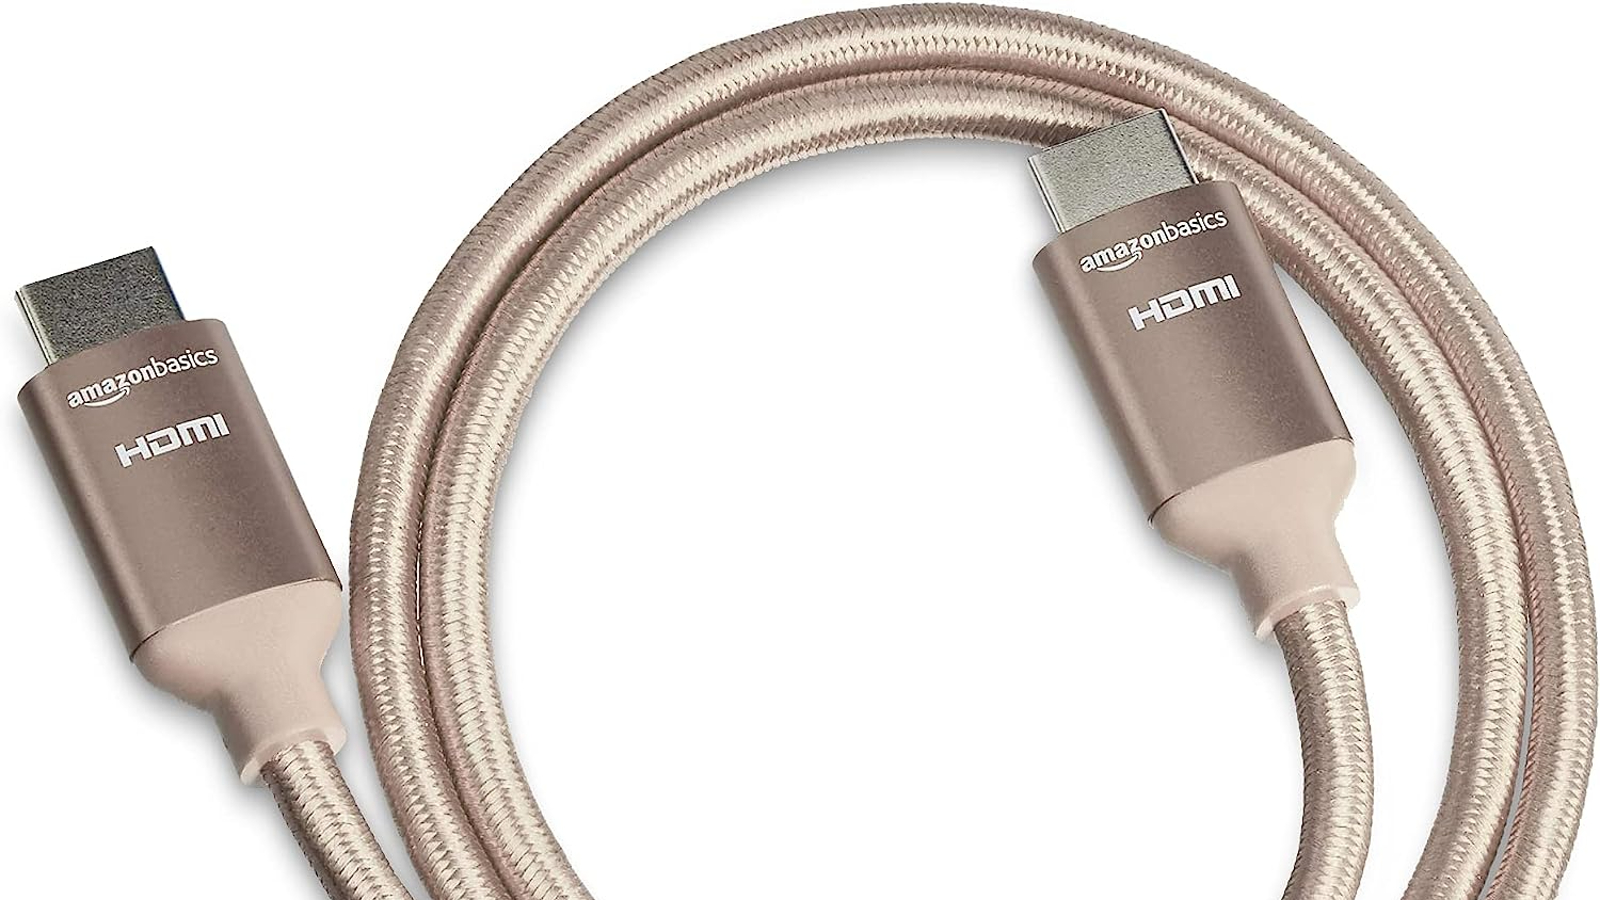 Amazon Basics braided gold HDMI Cable - Best for aesthetics